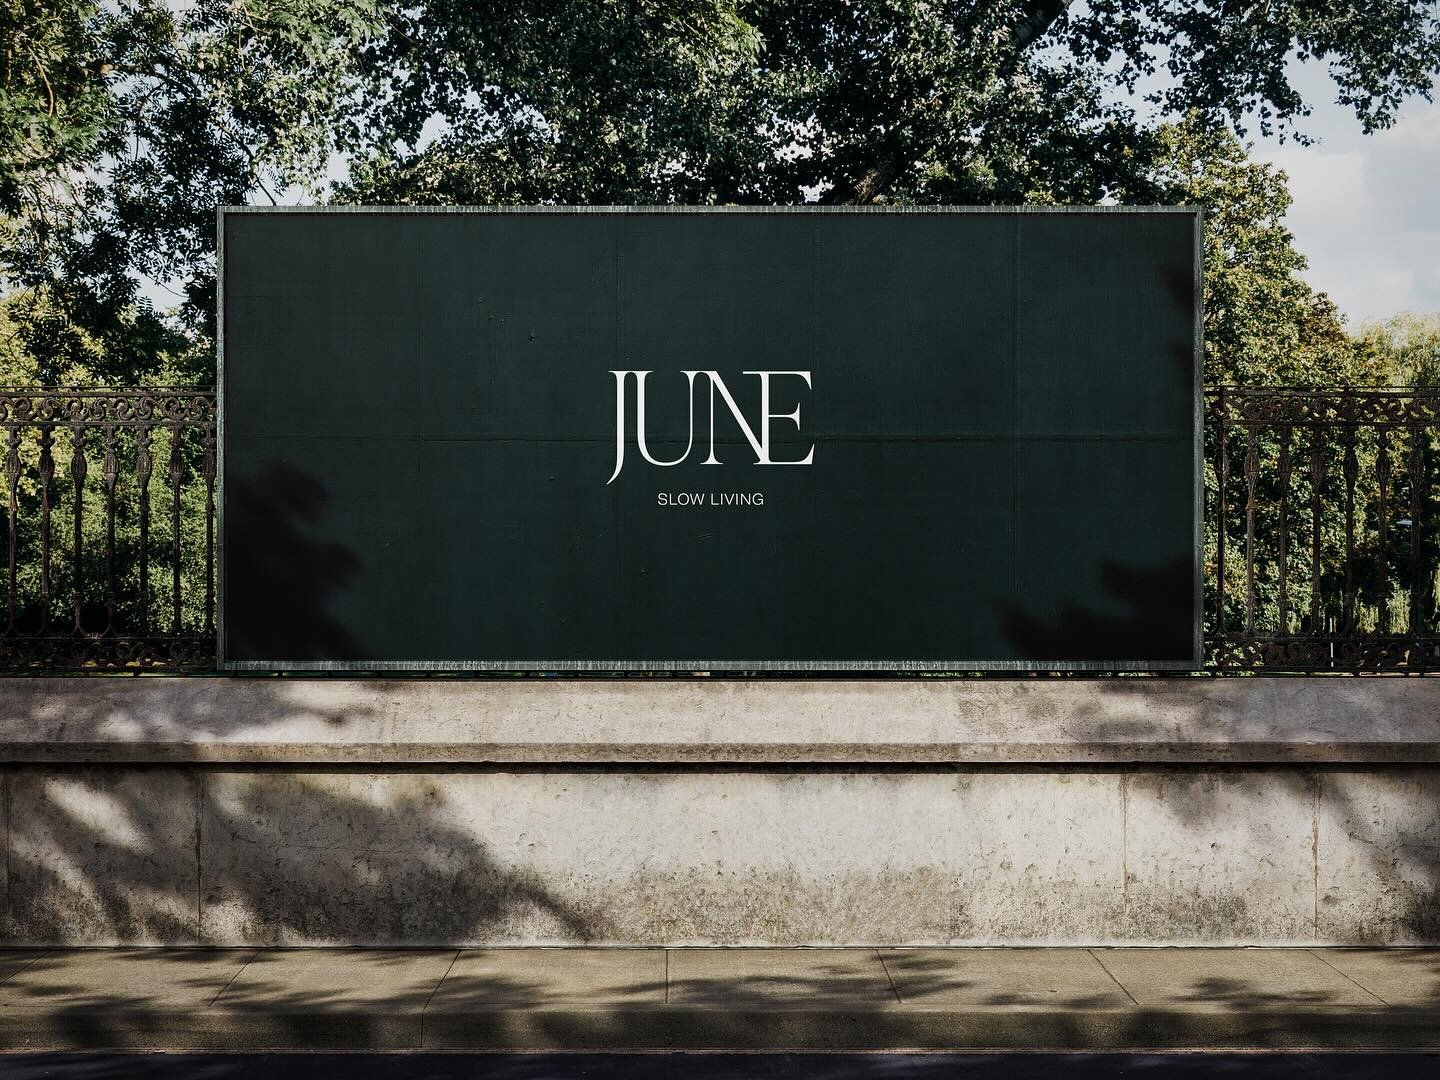 From brochures to site signage, we&rsquo;ve curated every detail for @landmarx.be June project in Putte. As their trusted partner, we oversee all aspects of art direction, ensuring every element reflects luxury and exclusivity. Elevate your developme